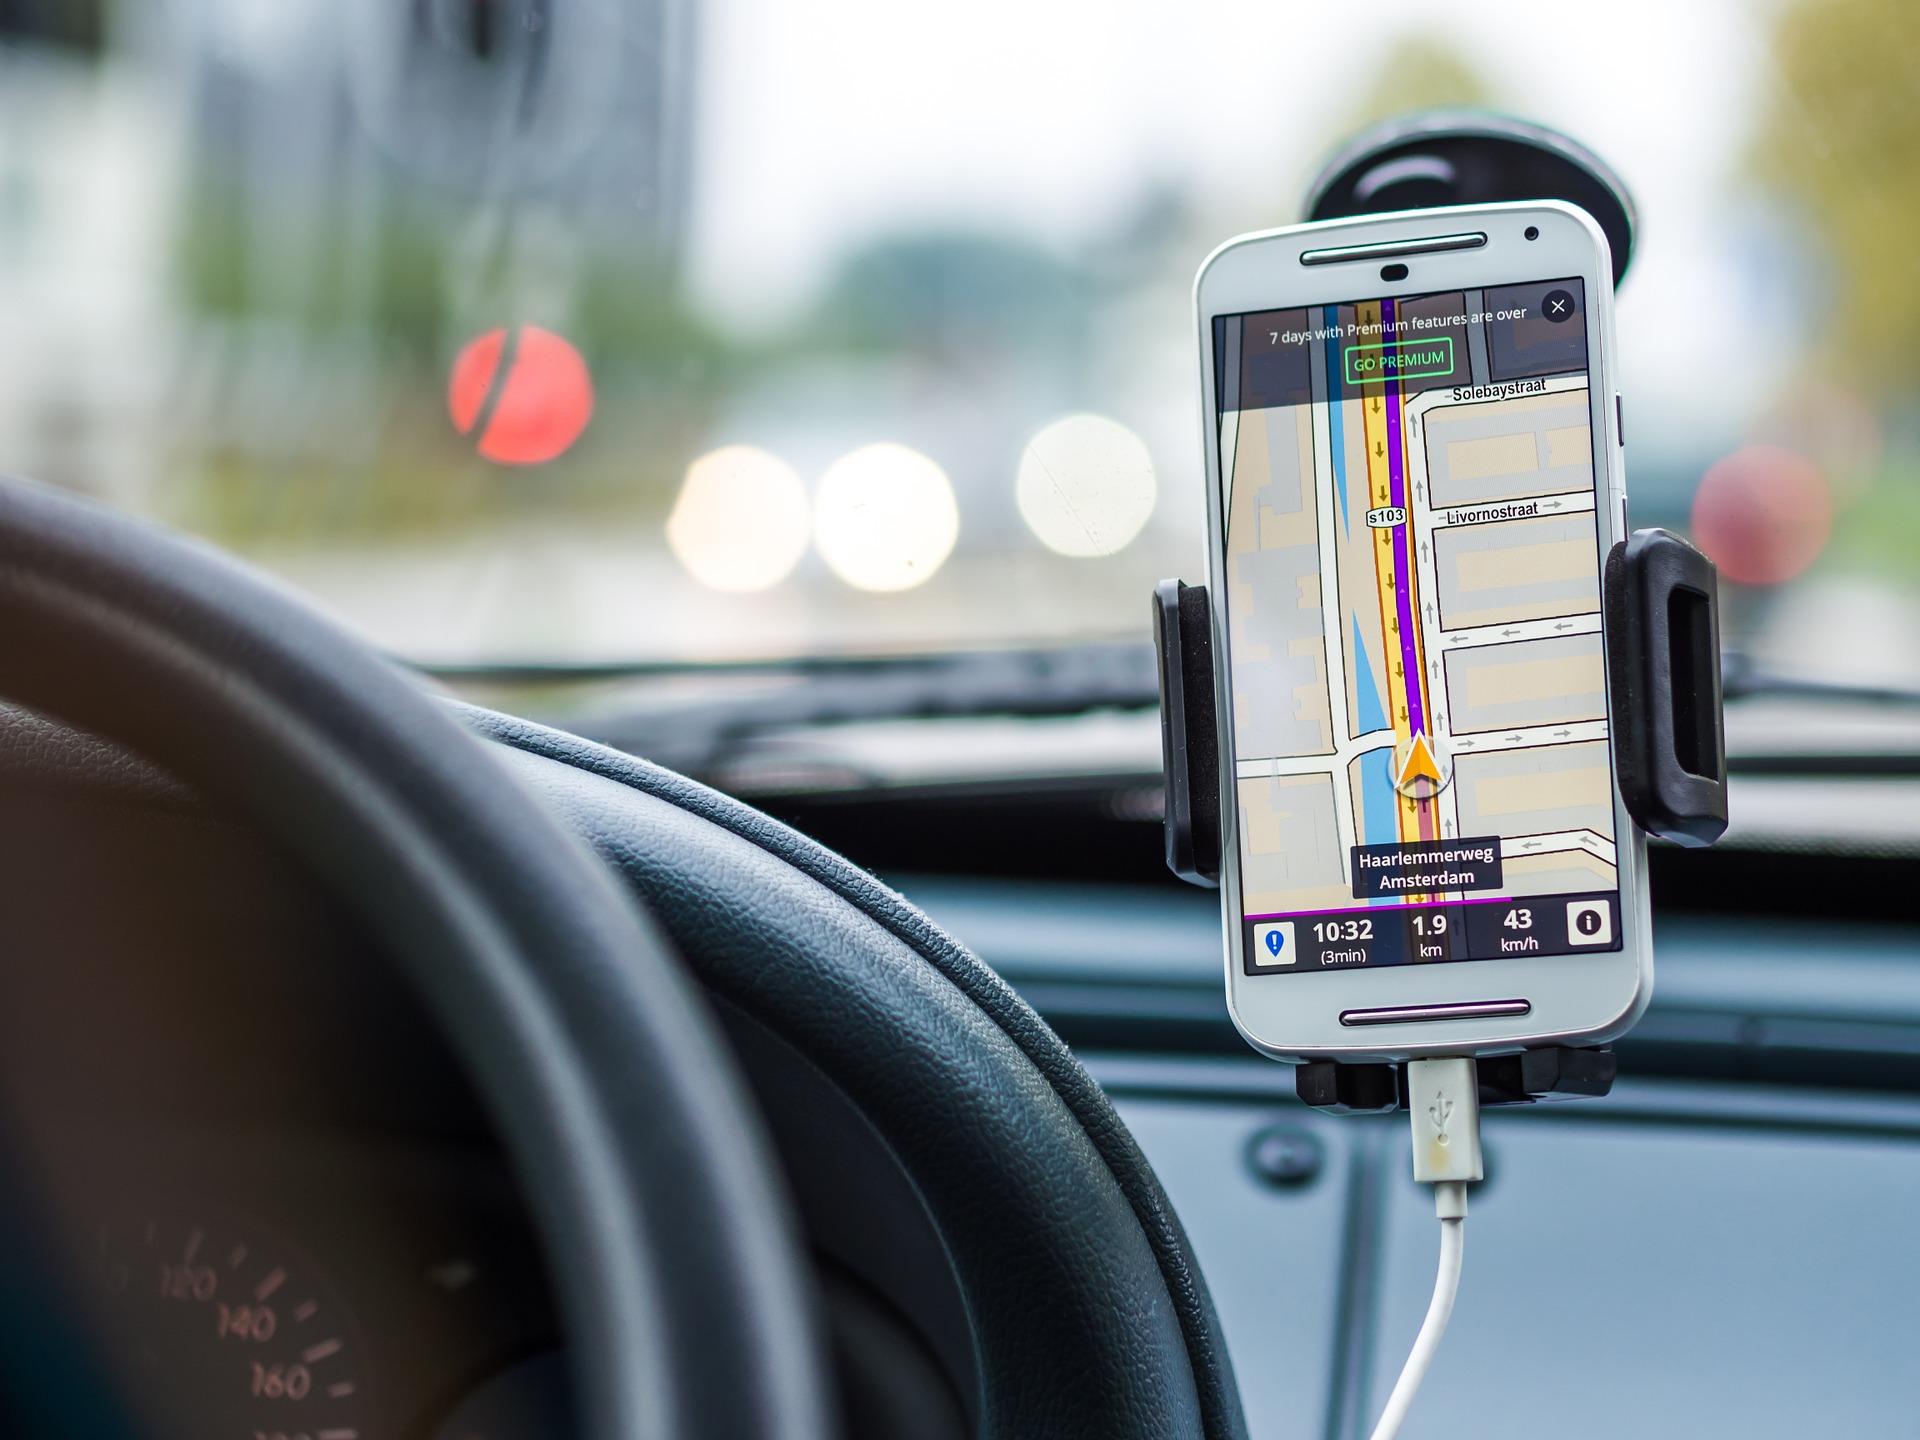 GPS Issues On Your Android Phone